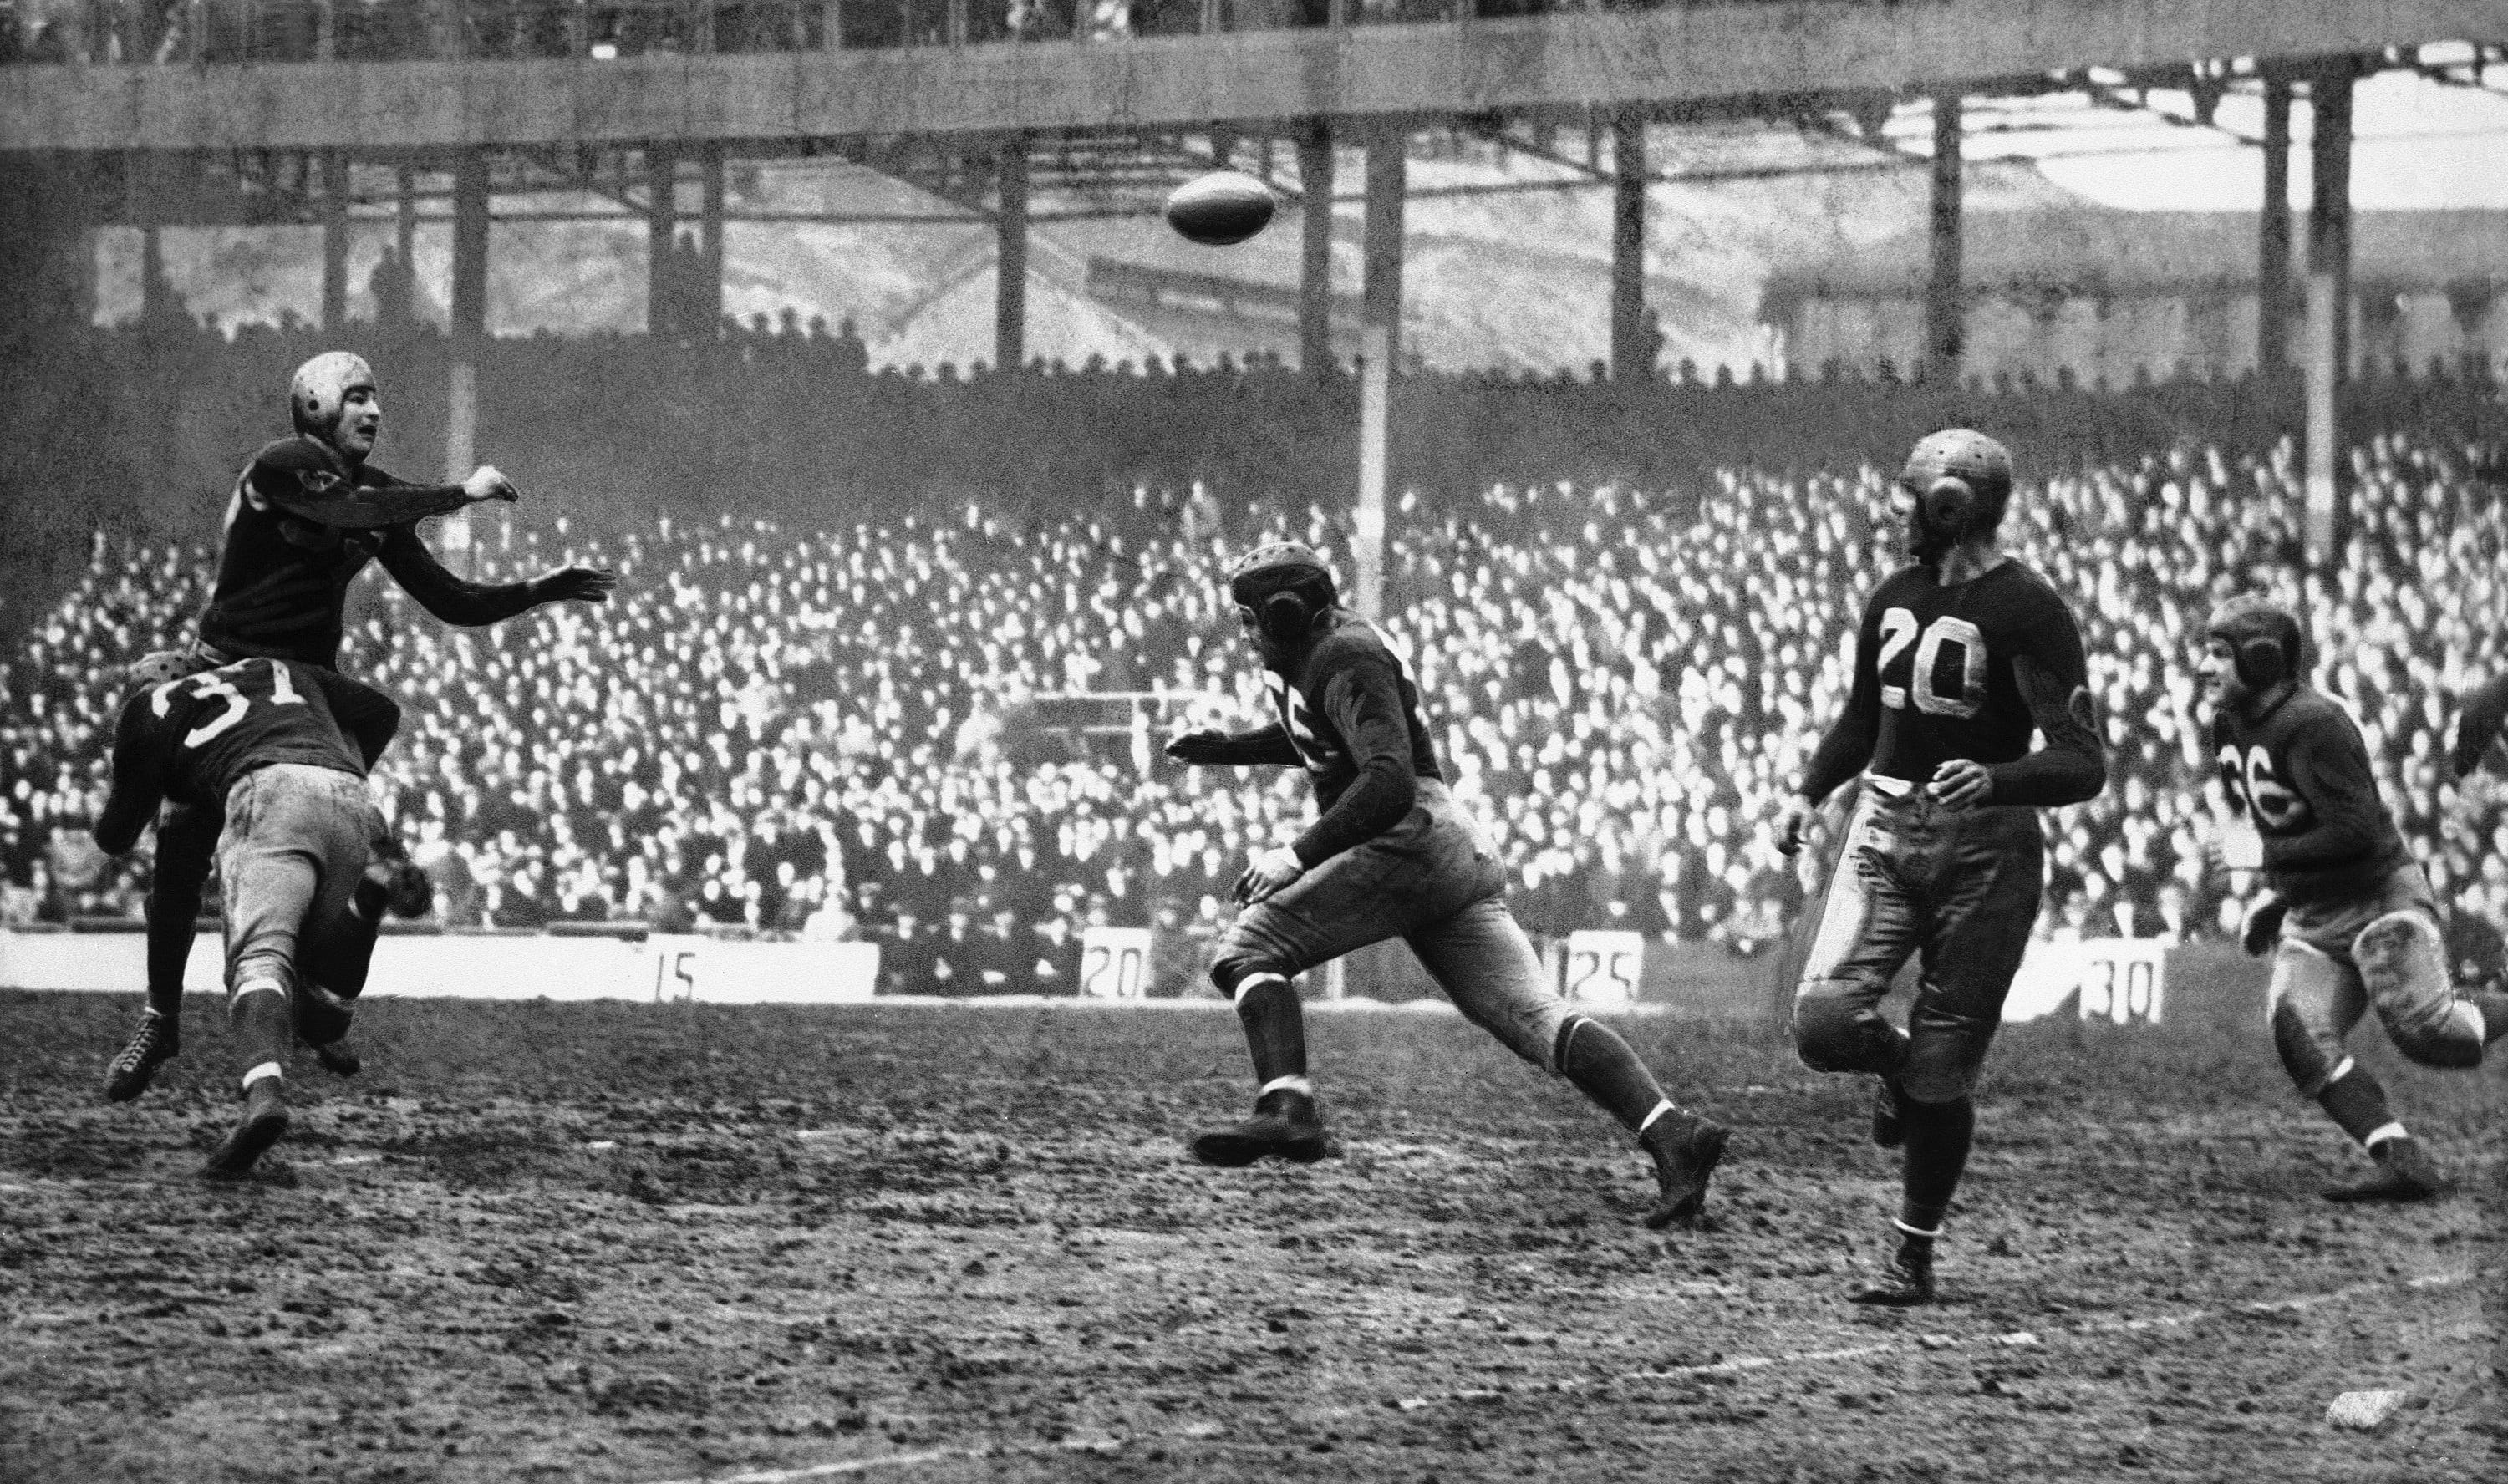 Sam Baugh of the Washington Redskins throws a pass during a game against the New York Giants in December 1937.